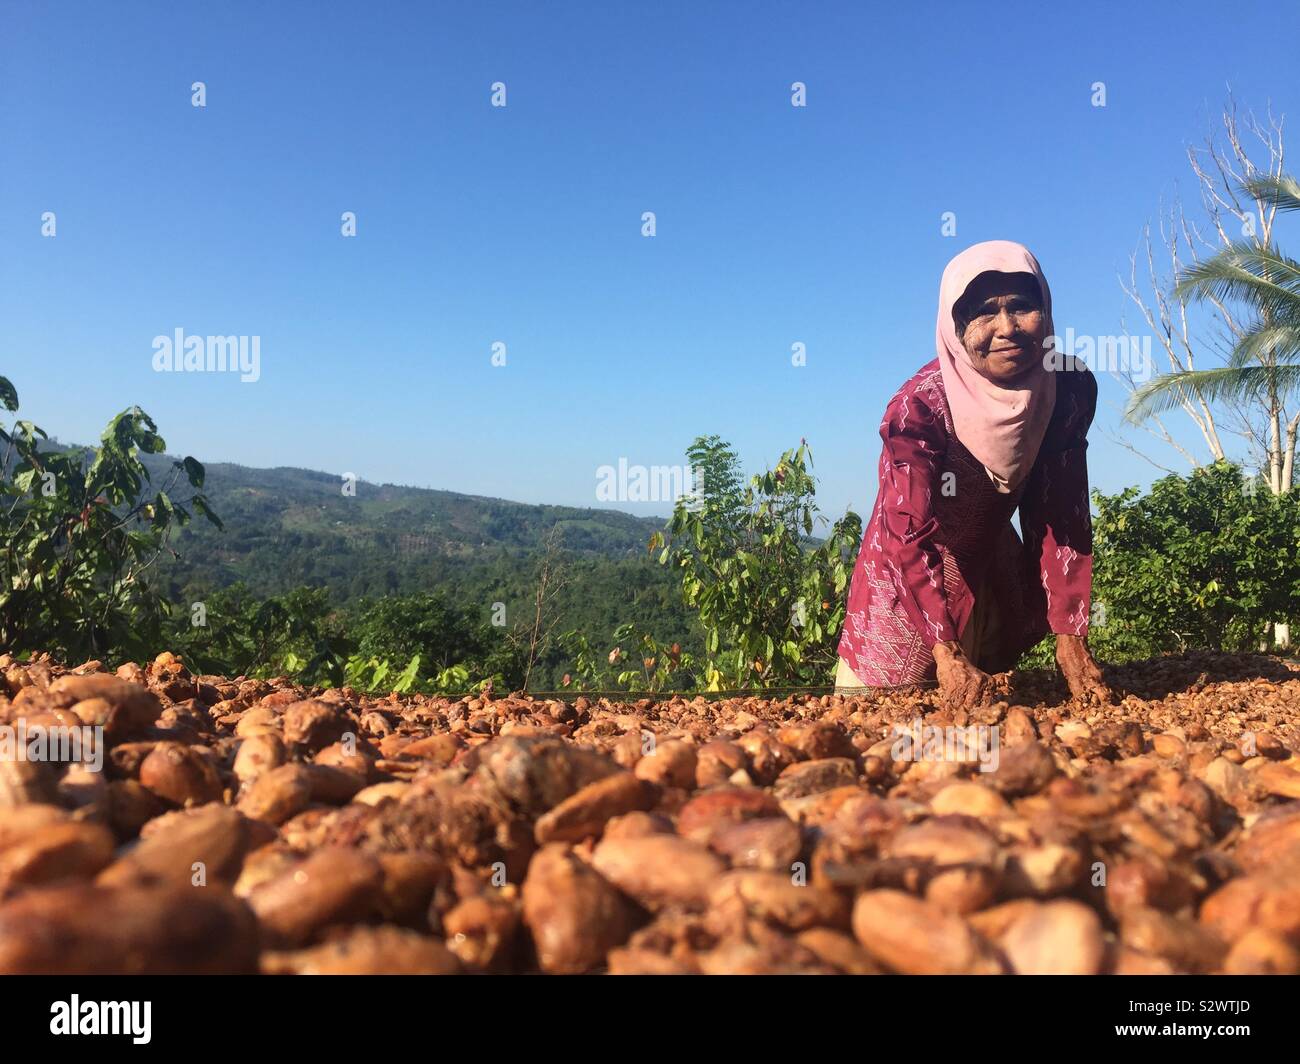 Farmers drying cocoa beans in the mountains of Kolaka, Southeast Sulawesi, Indonesia.  In the last three years, cocoa sales have declined to the detriment of cocoa farmers. Stock Photo